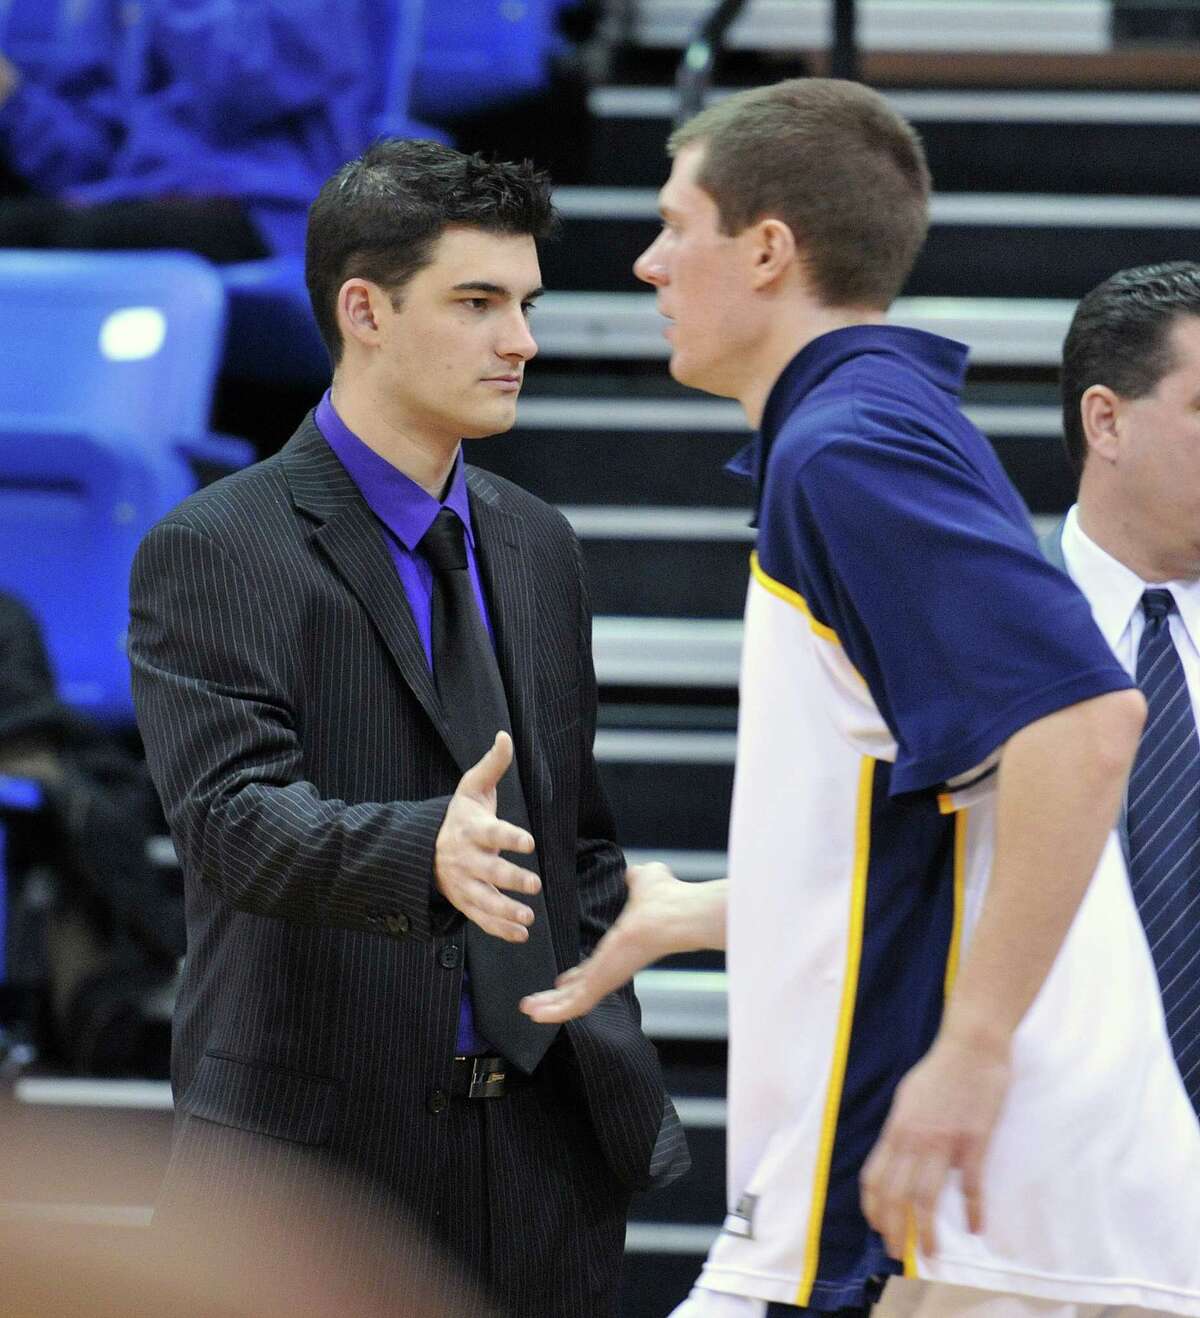 Former Quinnipiac manager Mike Papale during game against Bryant on January 31, 2011.